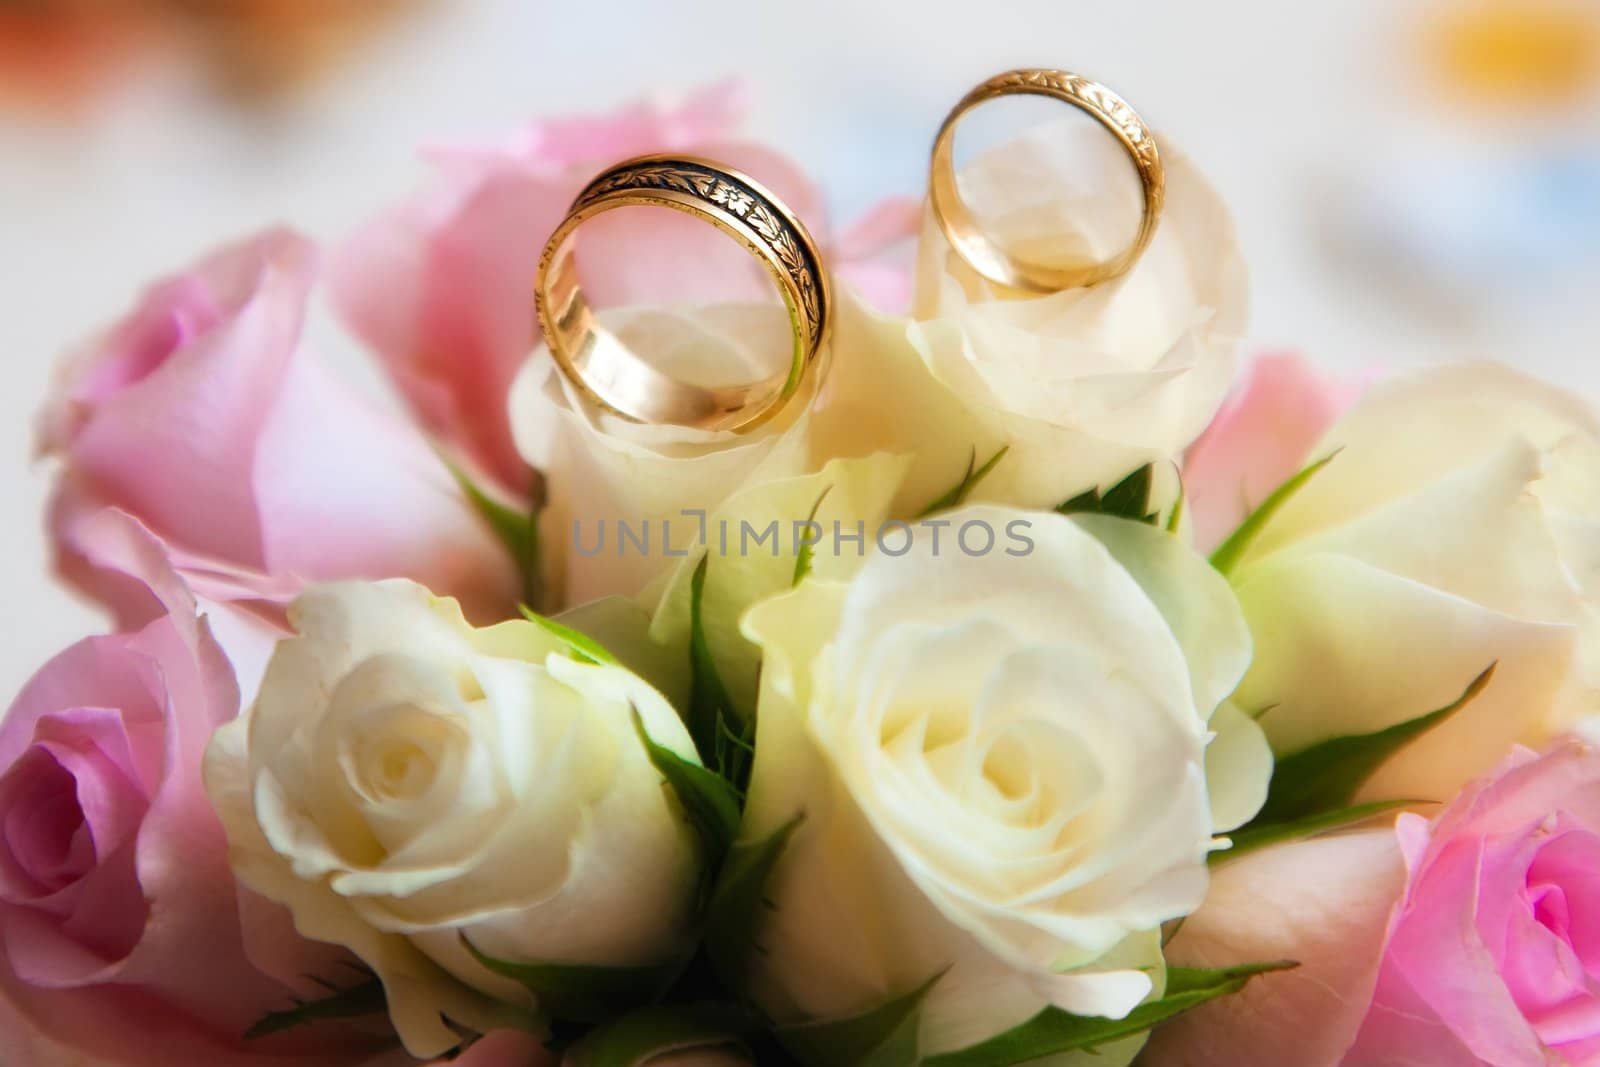 wedding rings with bouquet